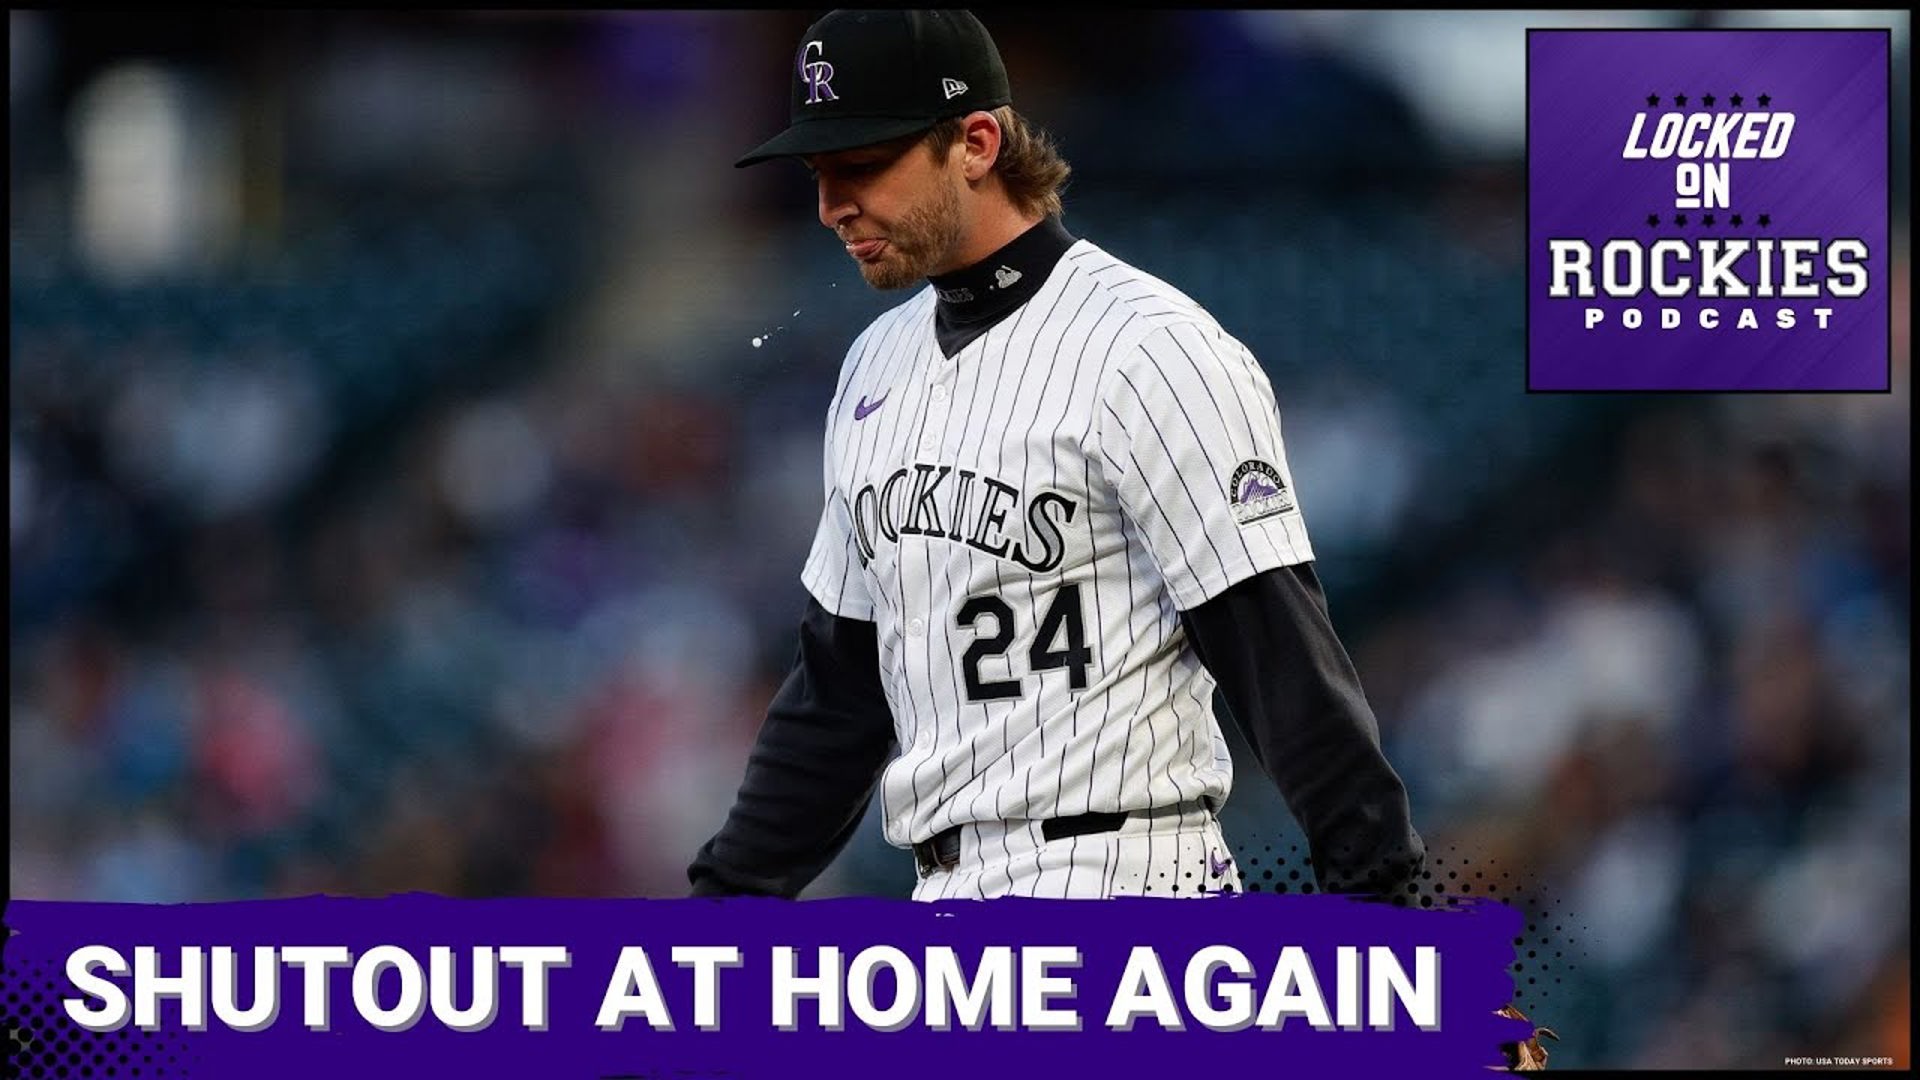 Wherever the Rockies play their woes on offense have followed. The Rockies are on pace to smash franchise records for number of time shut out in a season